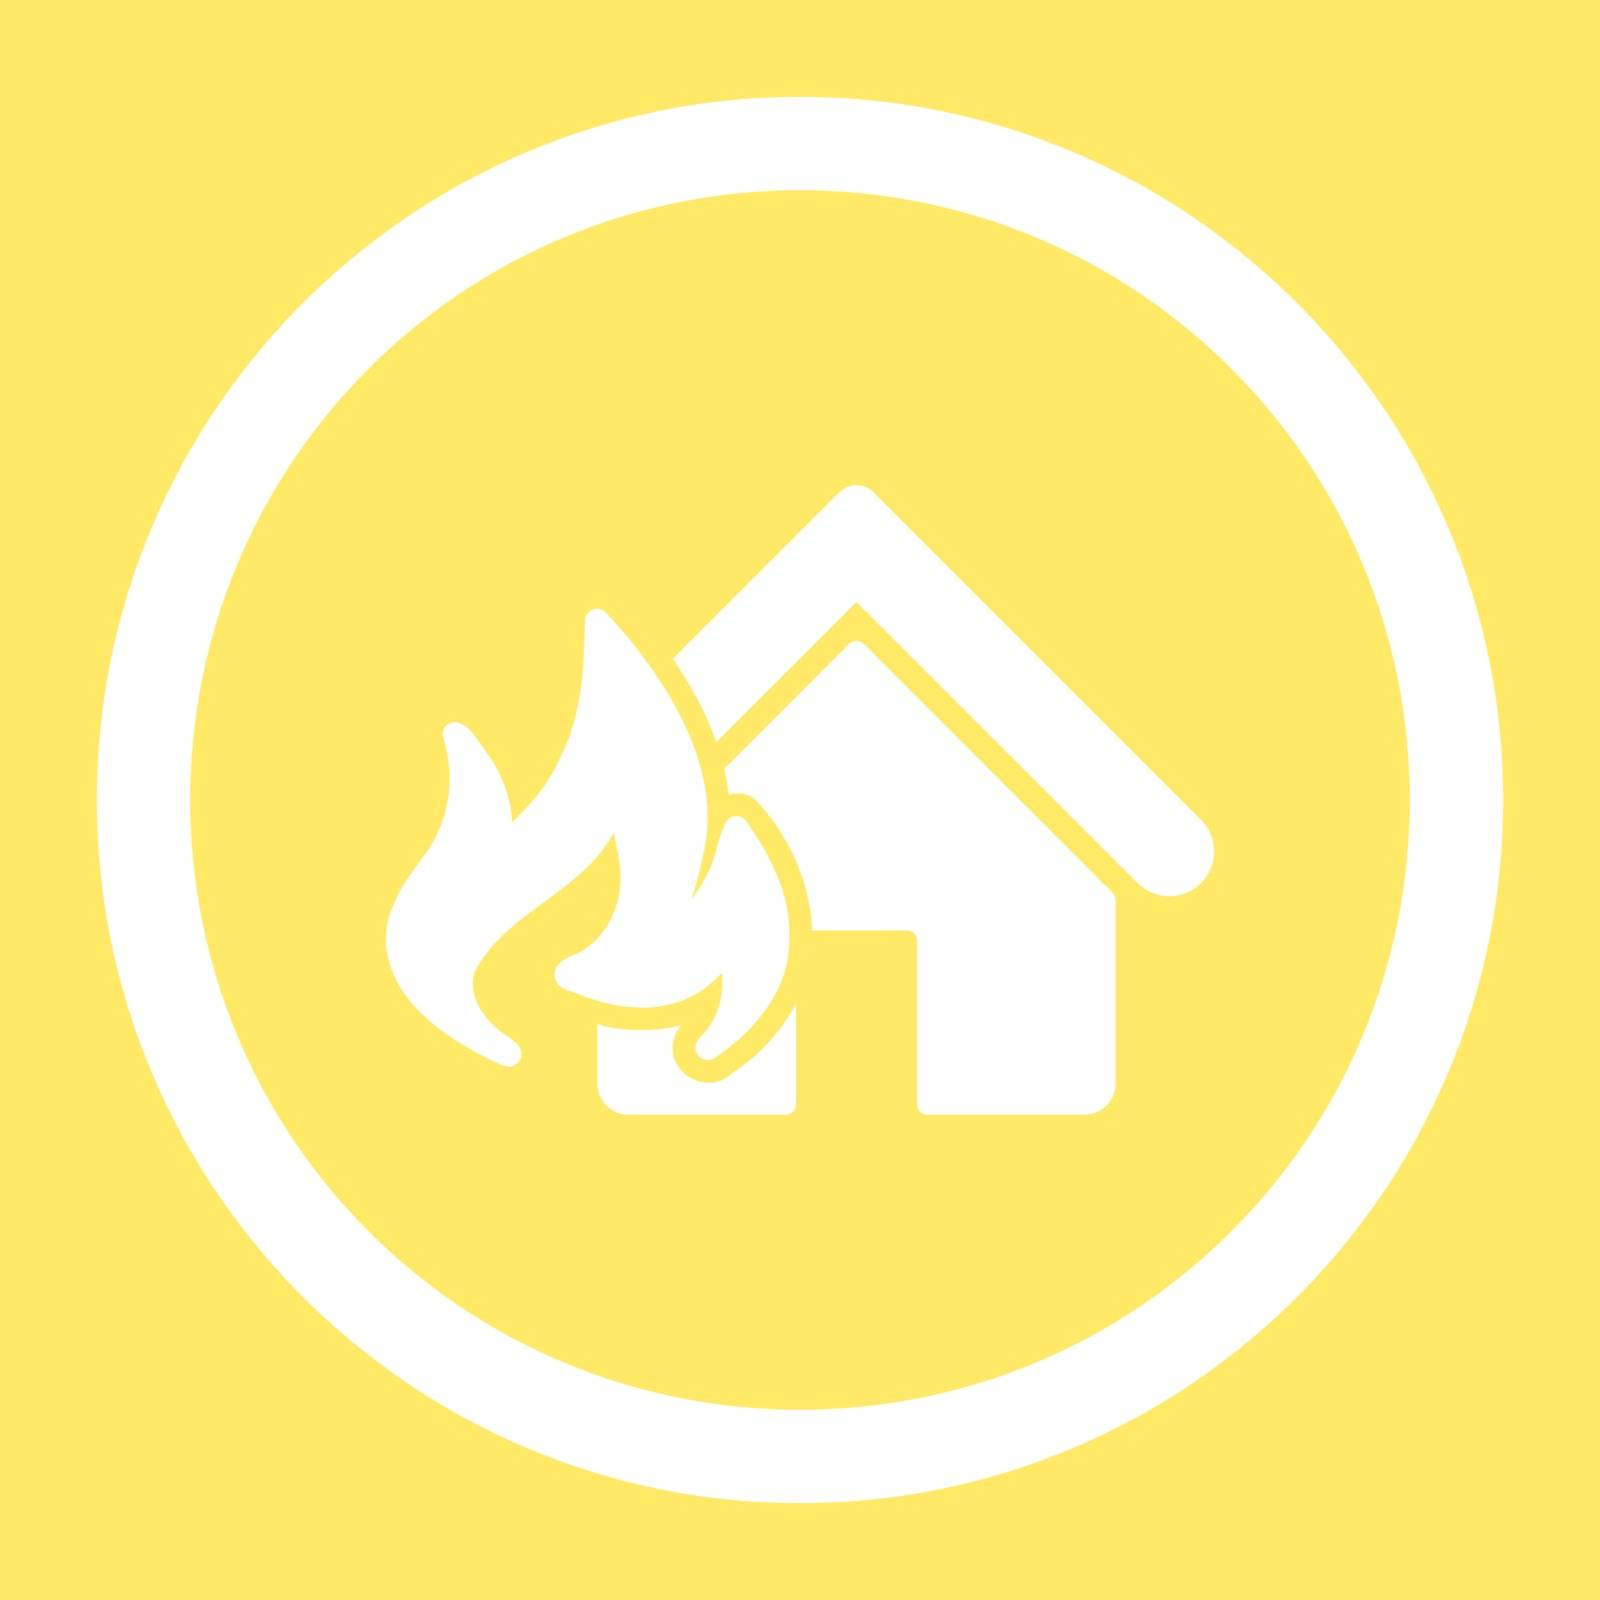 Fire Damage vector icon. This flat rounded symbol uses white color and isolated on a yellow background.